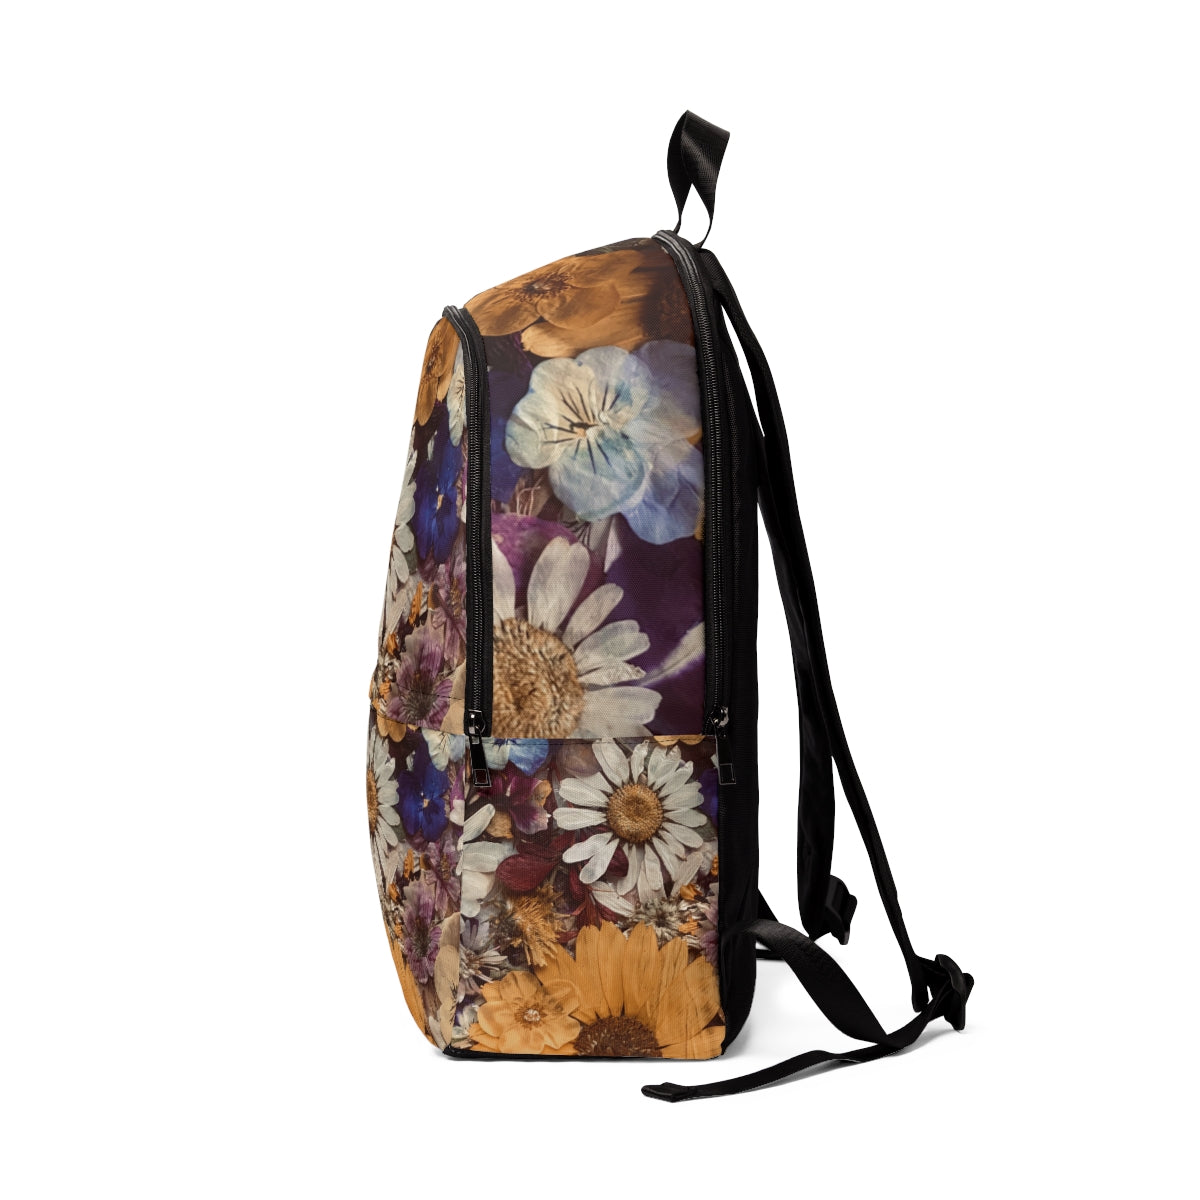 Pressed Flower Fabric Backpack